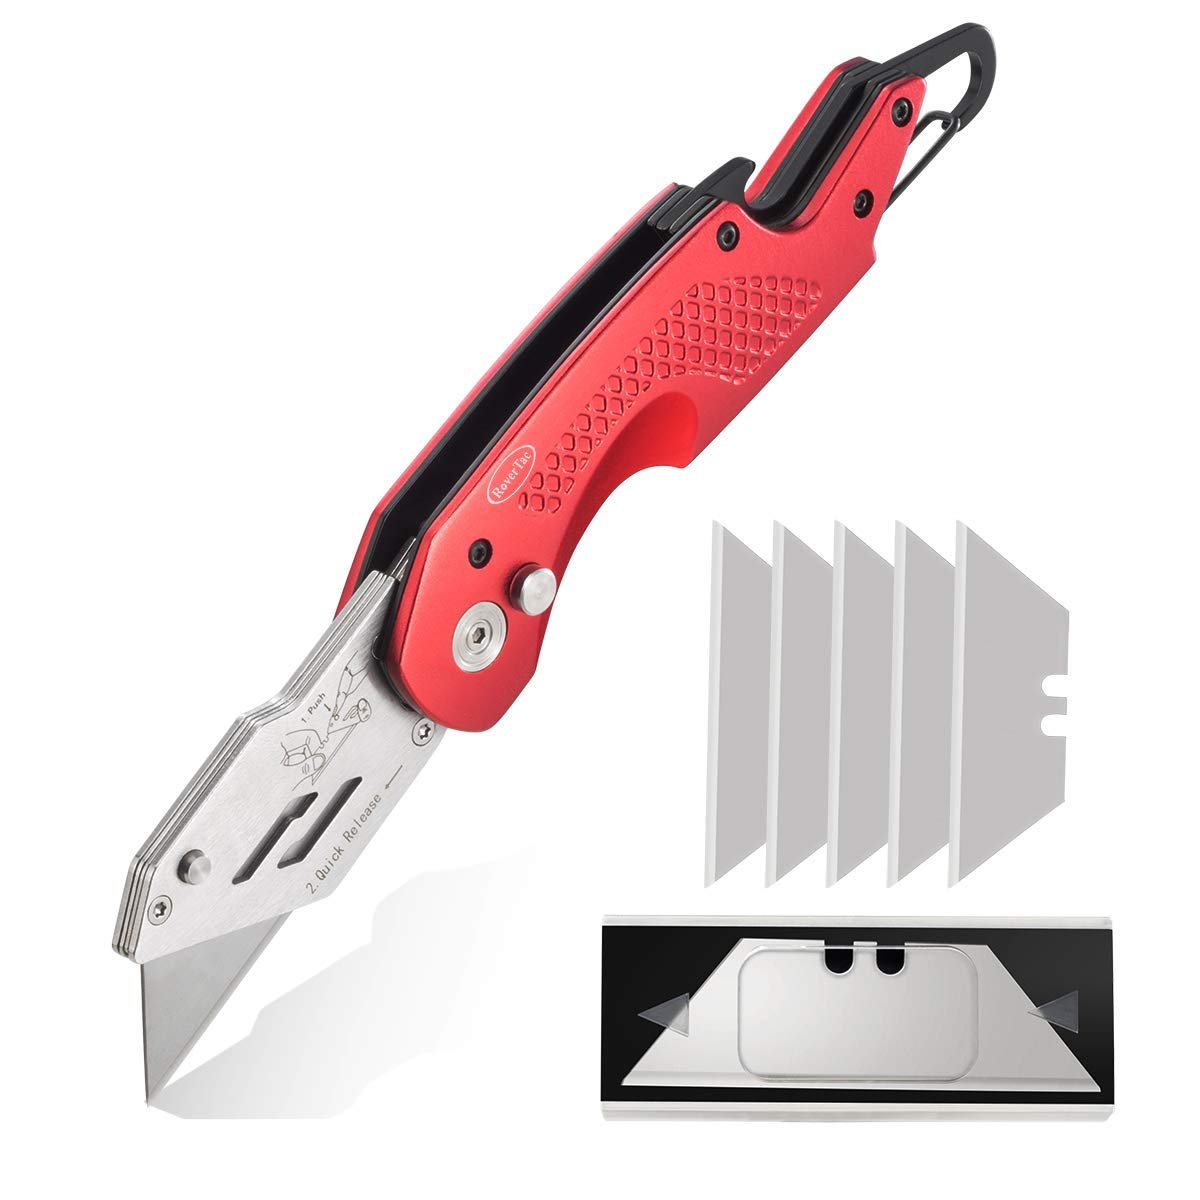 Book Cover RoverTac Box Cutter Folding Utility Knife Set with Sharp and Replaceable Blades Upgraded Stainless Steel Lock-Back Design Easy Carry Belt Clip for Cutting Works Lightweight Aluminum Body